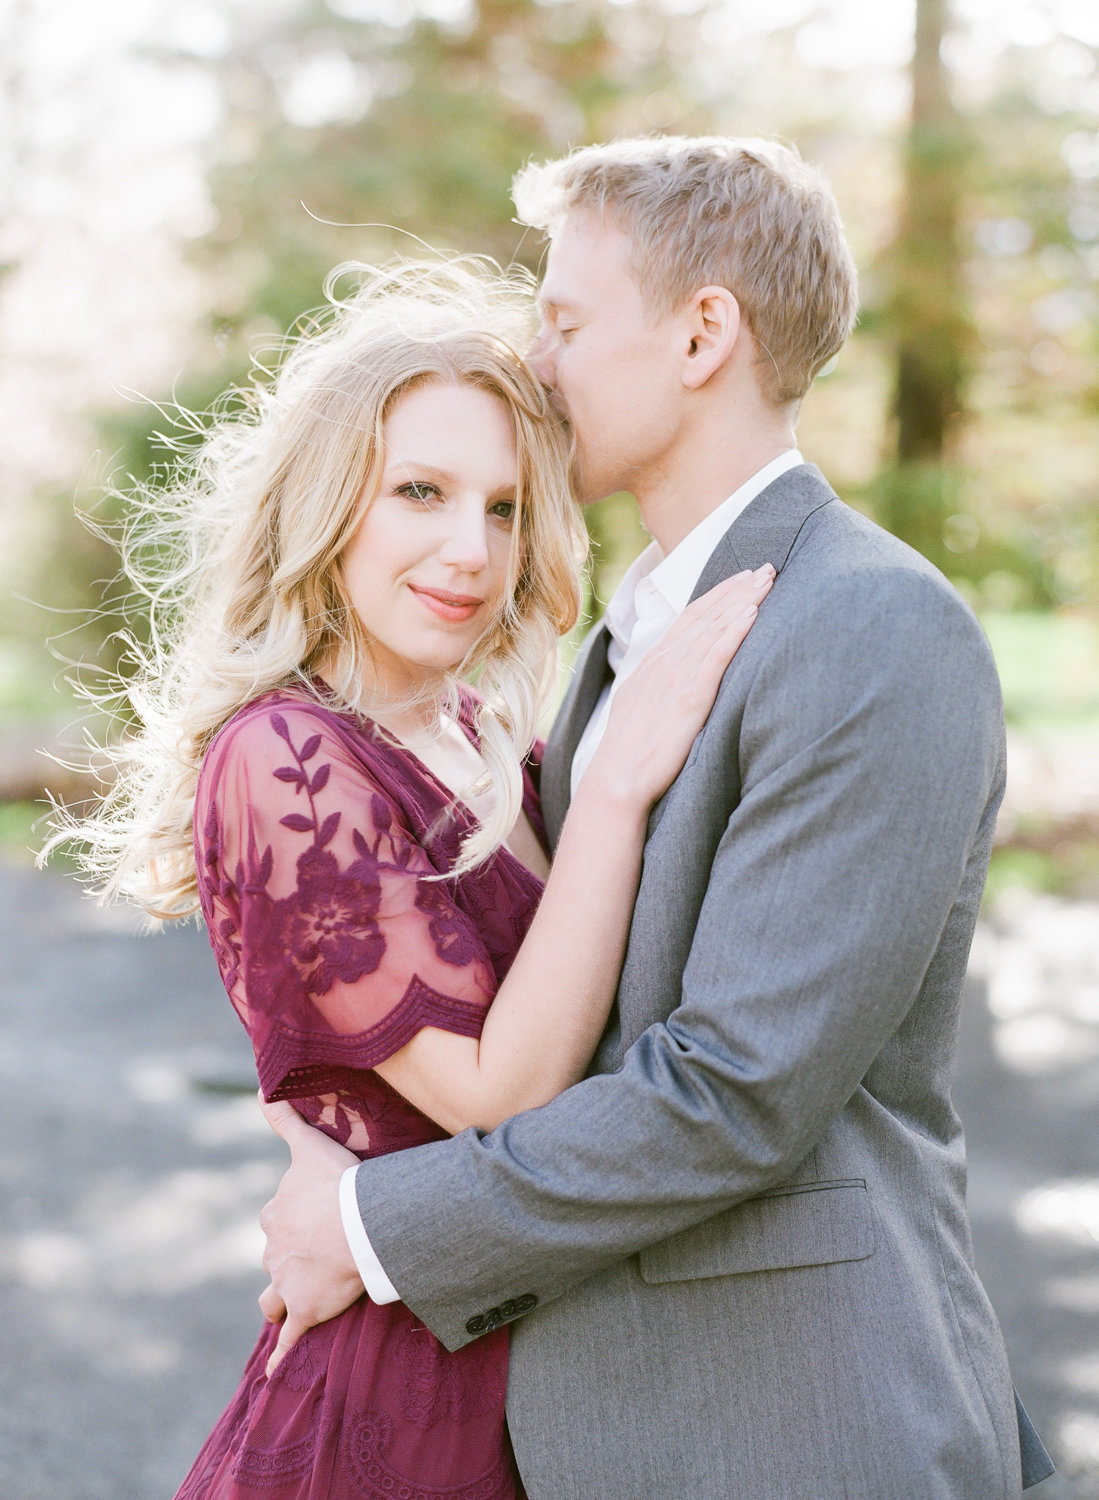 Jacqueline Anne Photography - Amanda and Brent-95